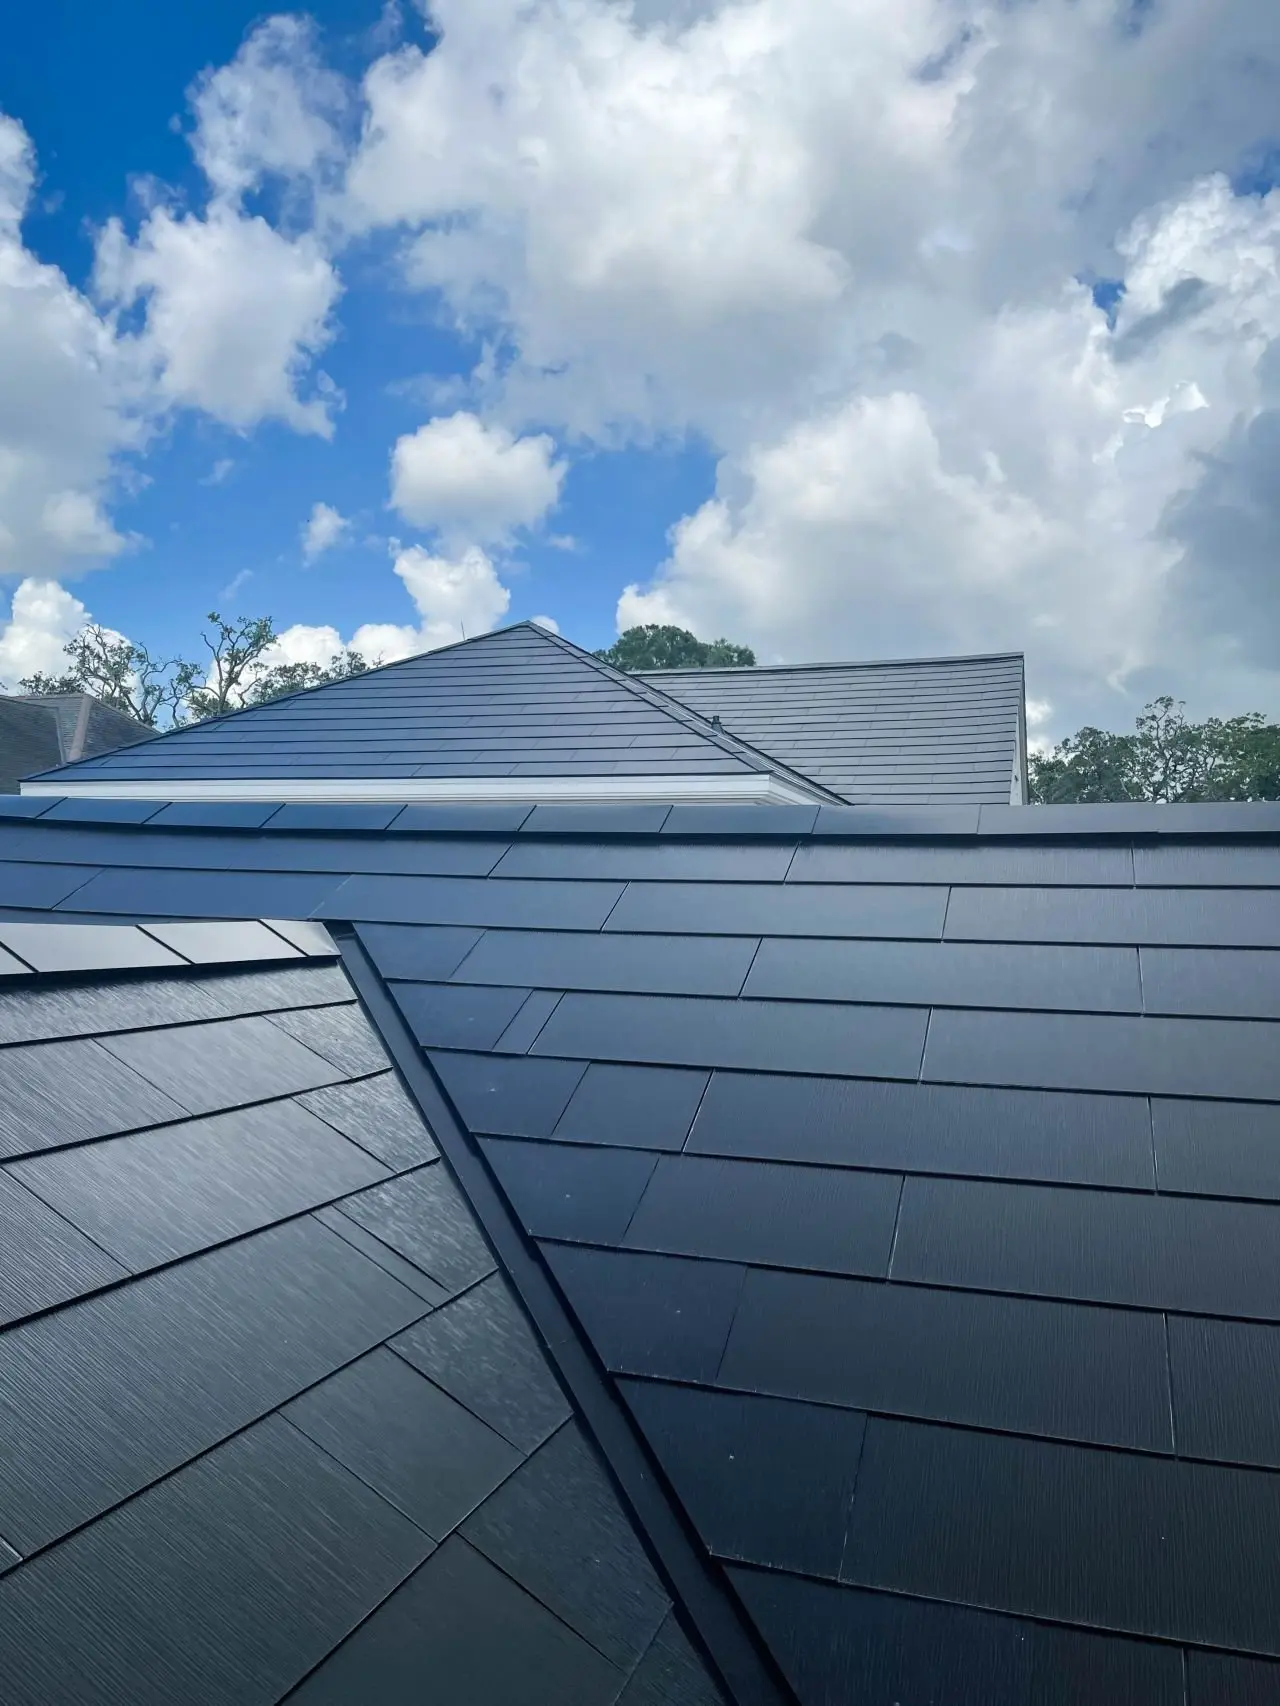 tesla solar panel roof tiles - How thick are Tesla solar roof tiles